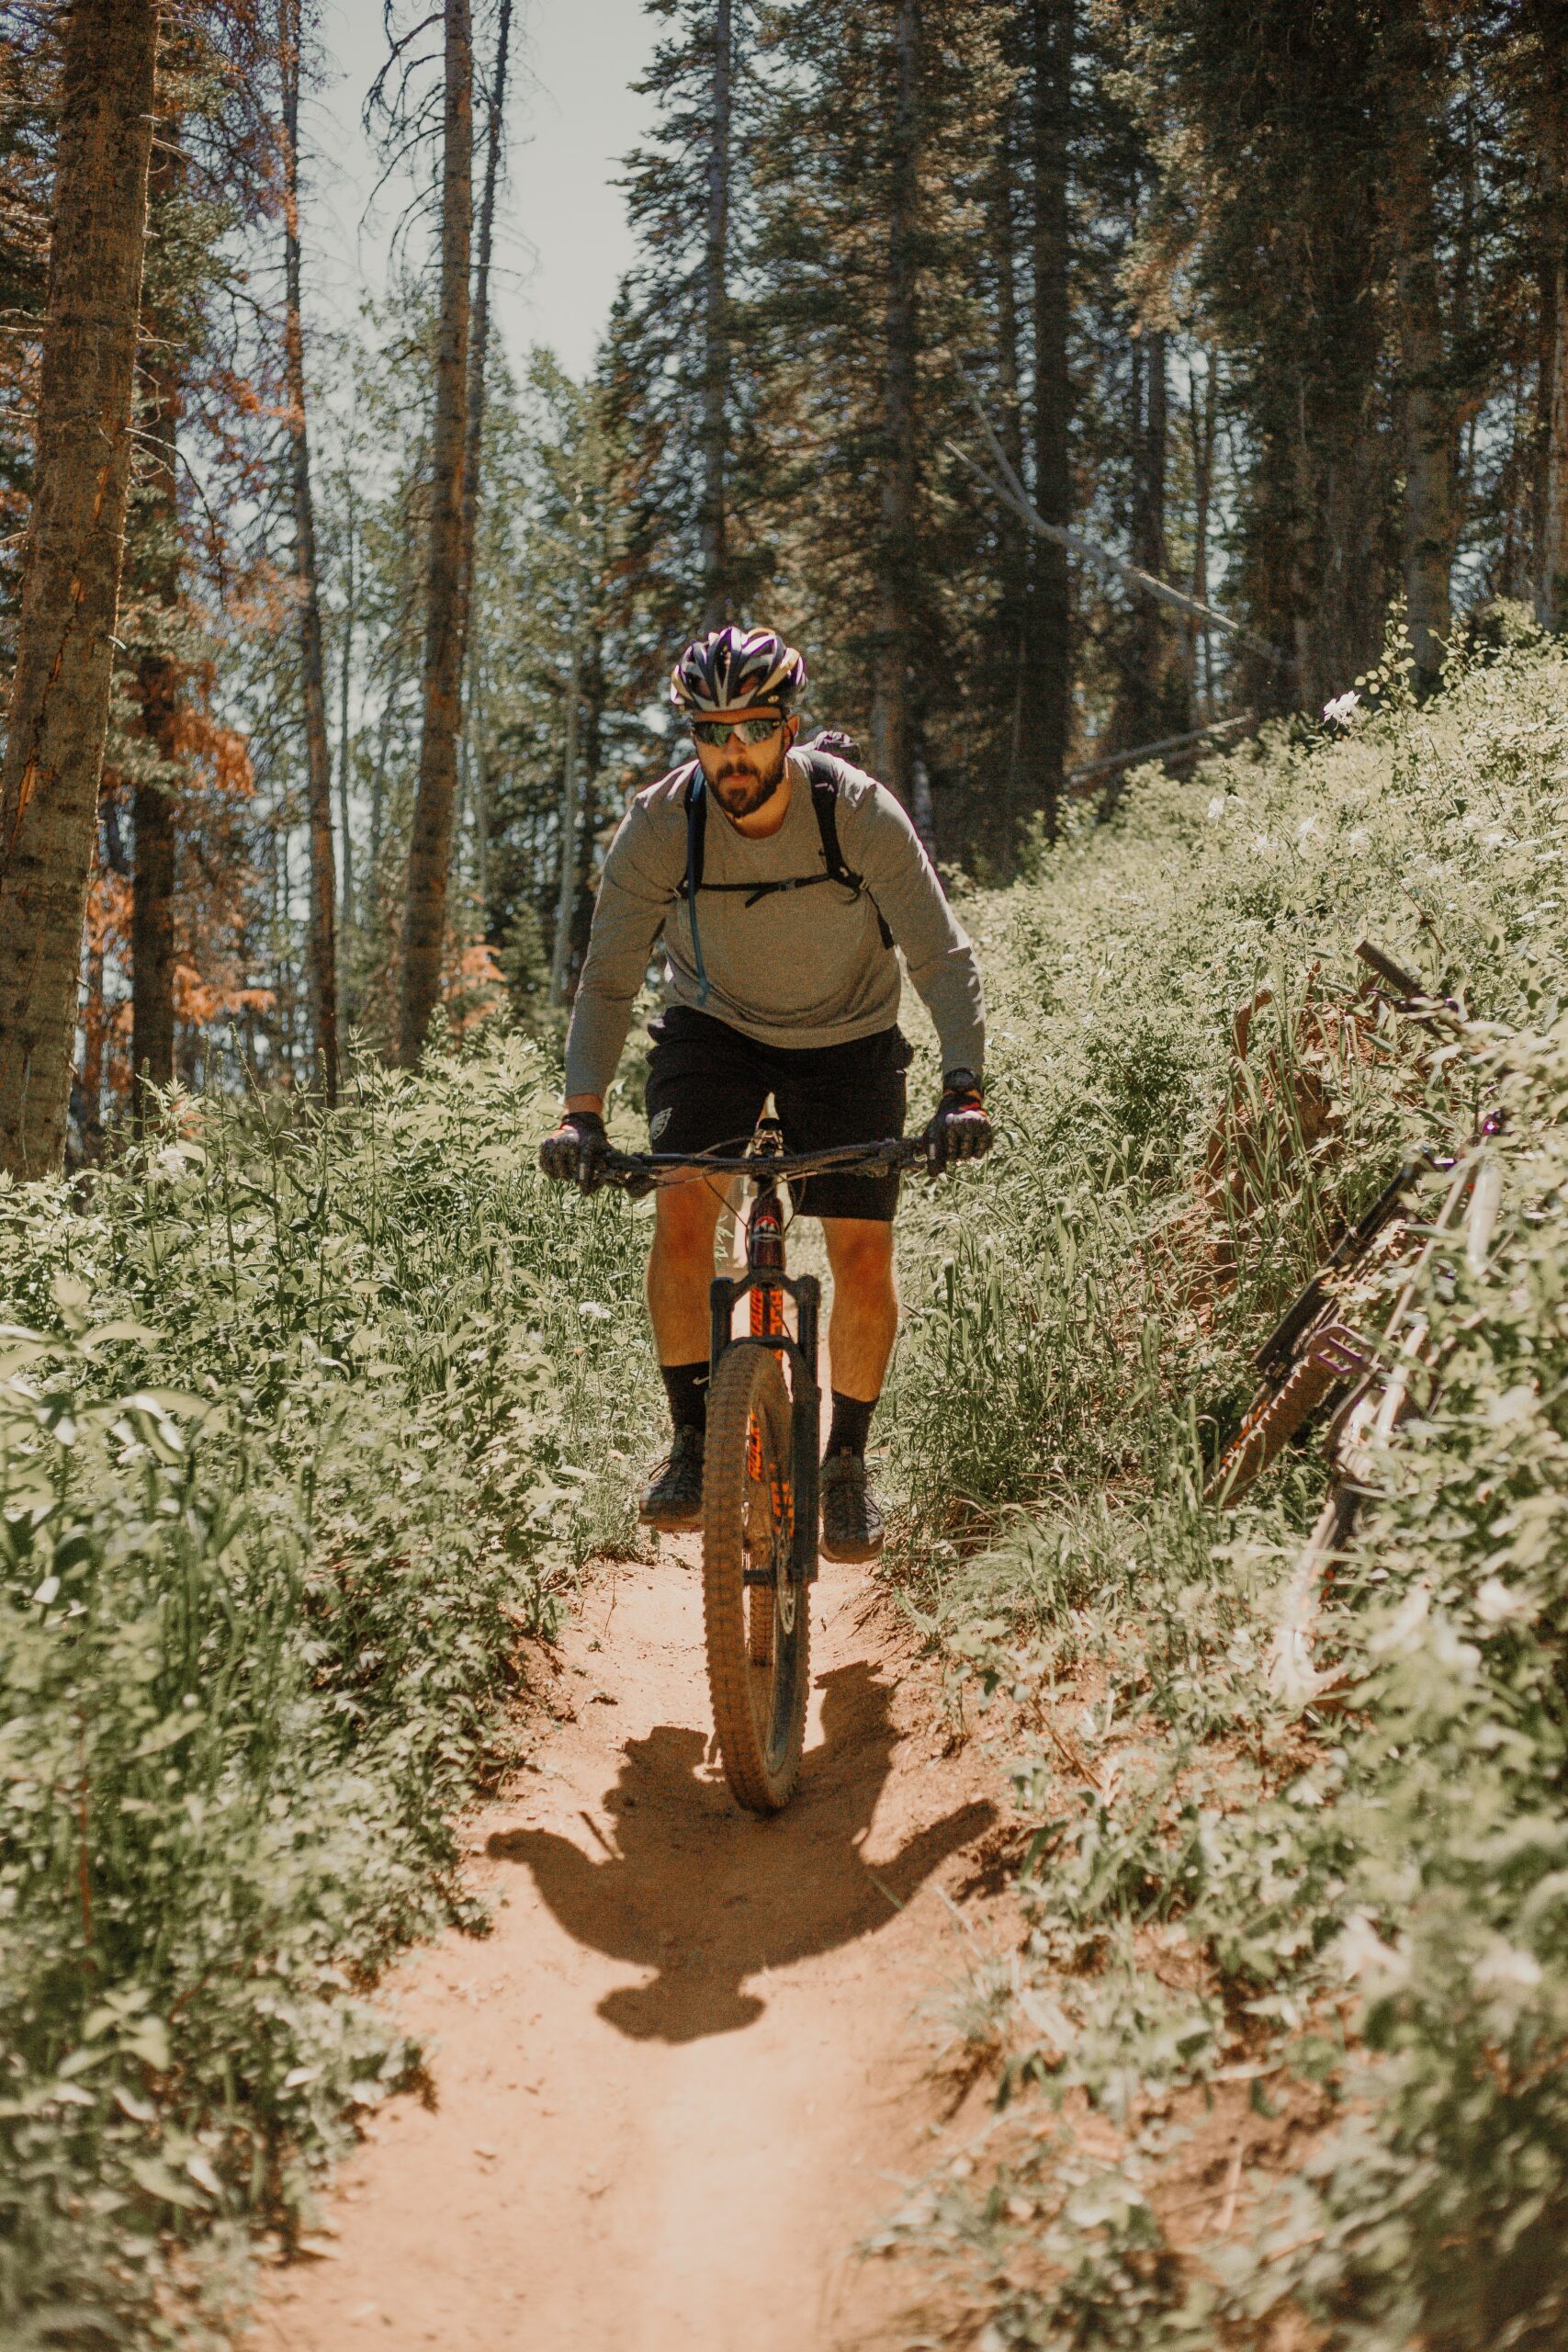 Chris Henry cycles through the forest, surrounded by lush greenery and natural beauty.